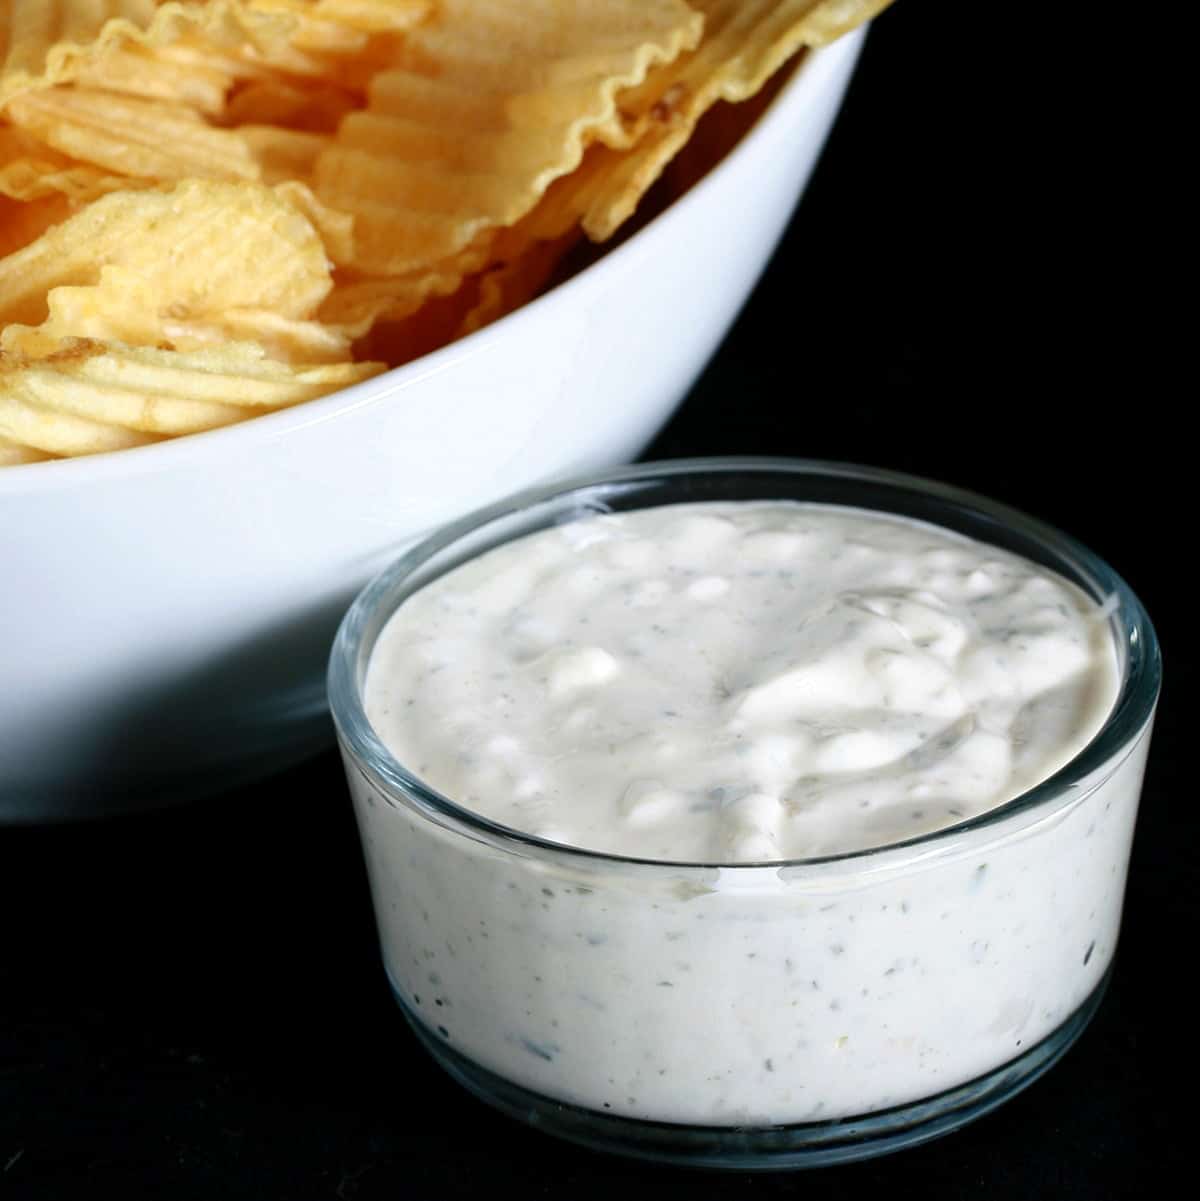 A close up view of a bowl of dill pickle cream cheese dip, next to a white bowl full of ripple chips.